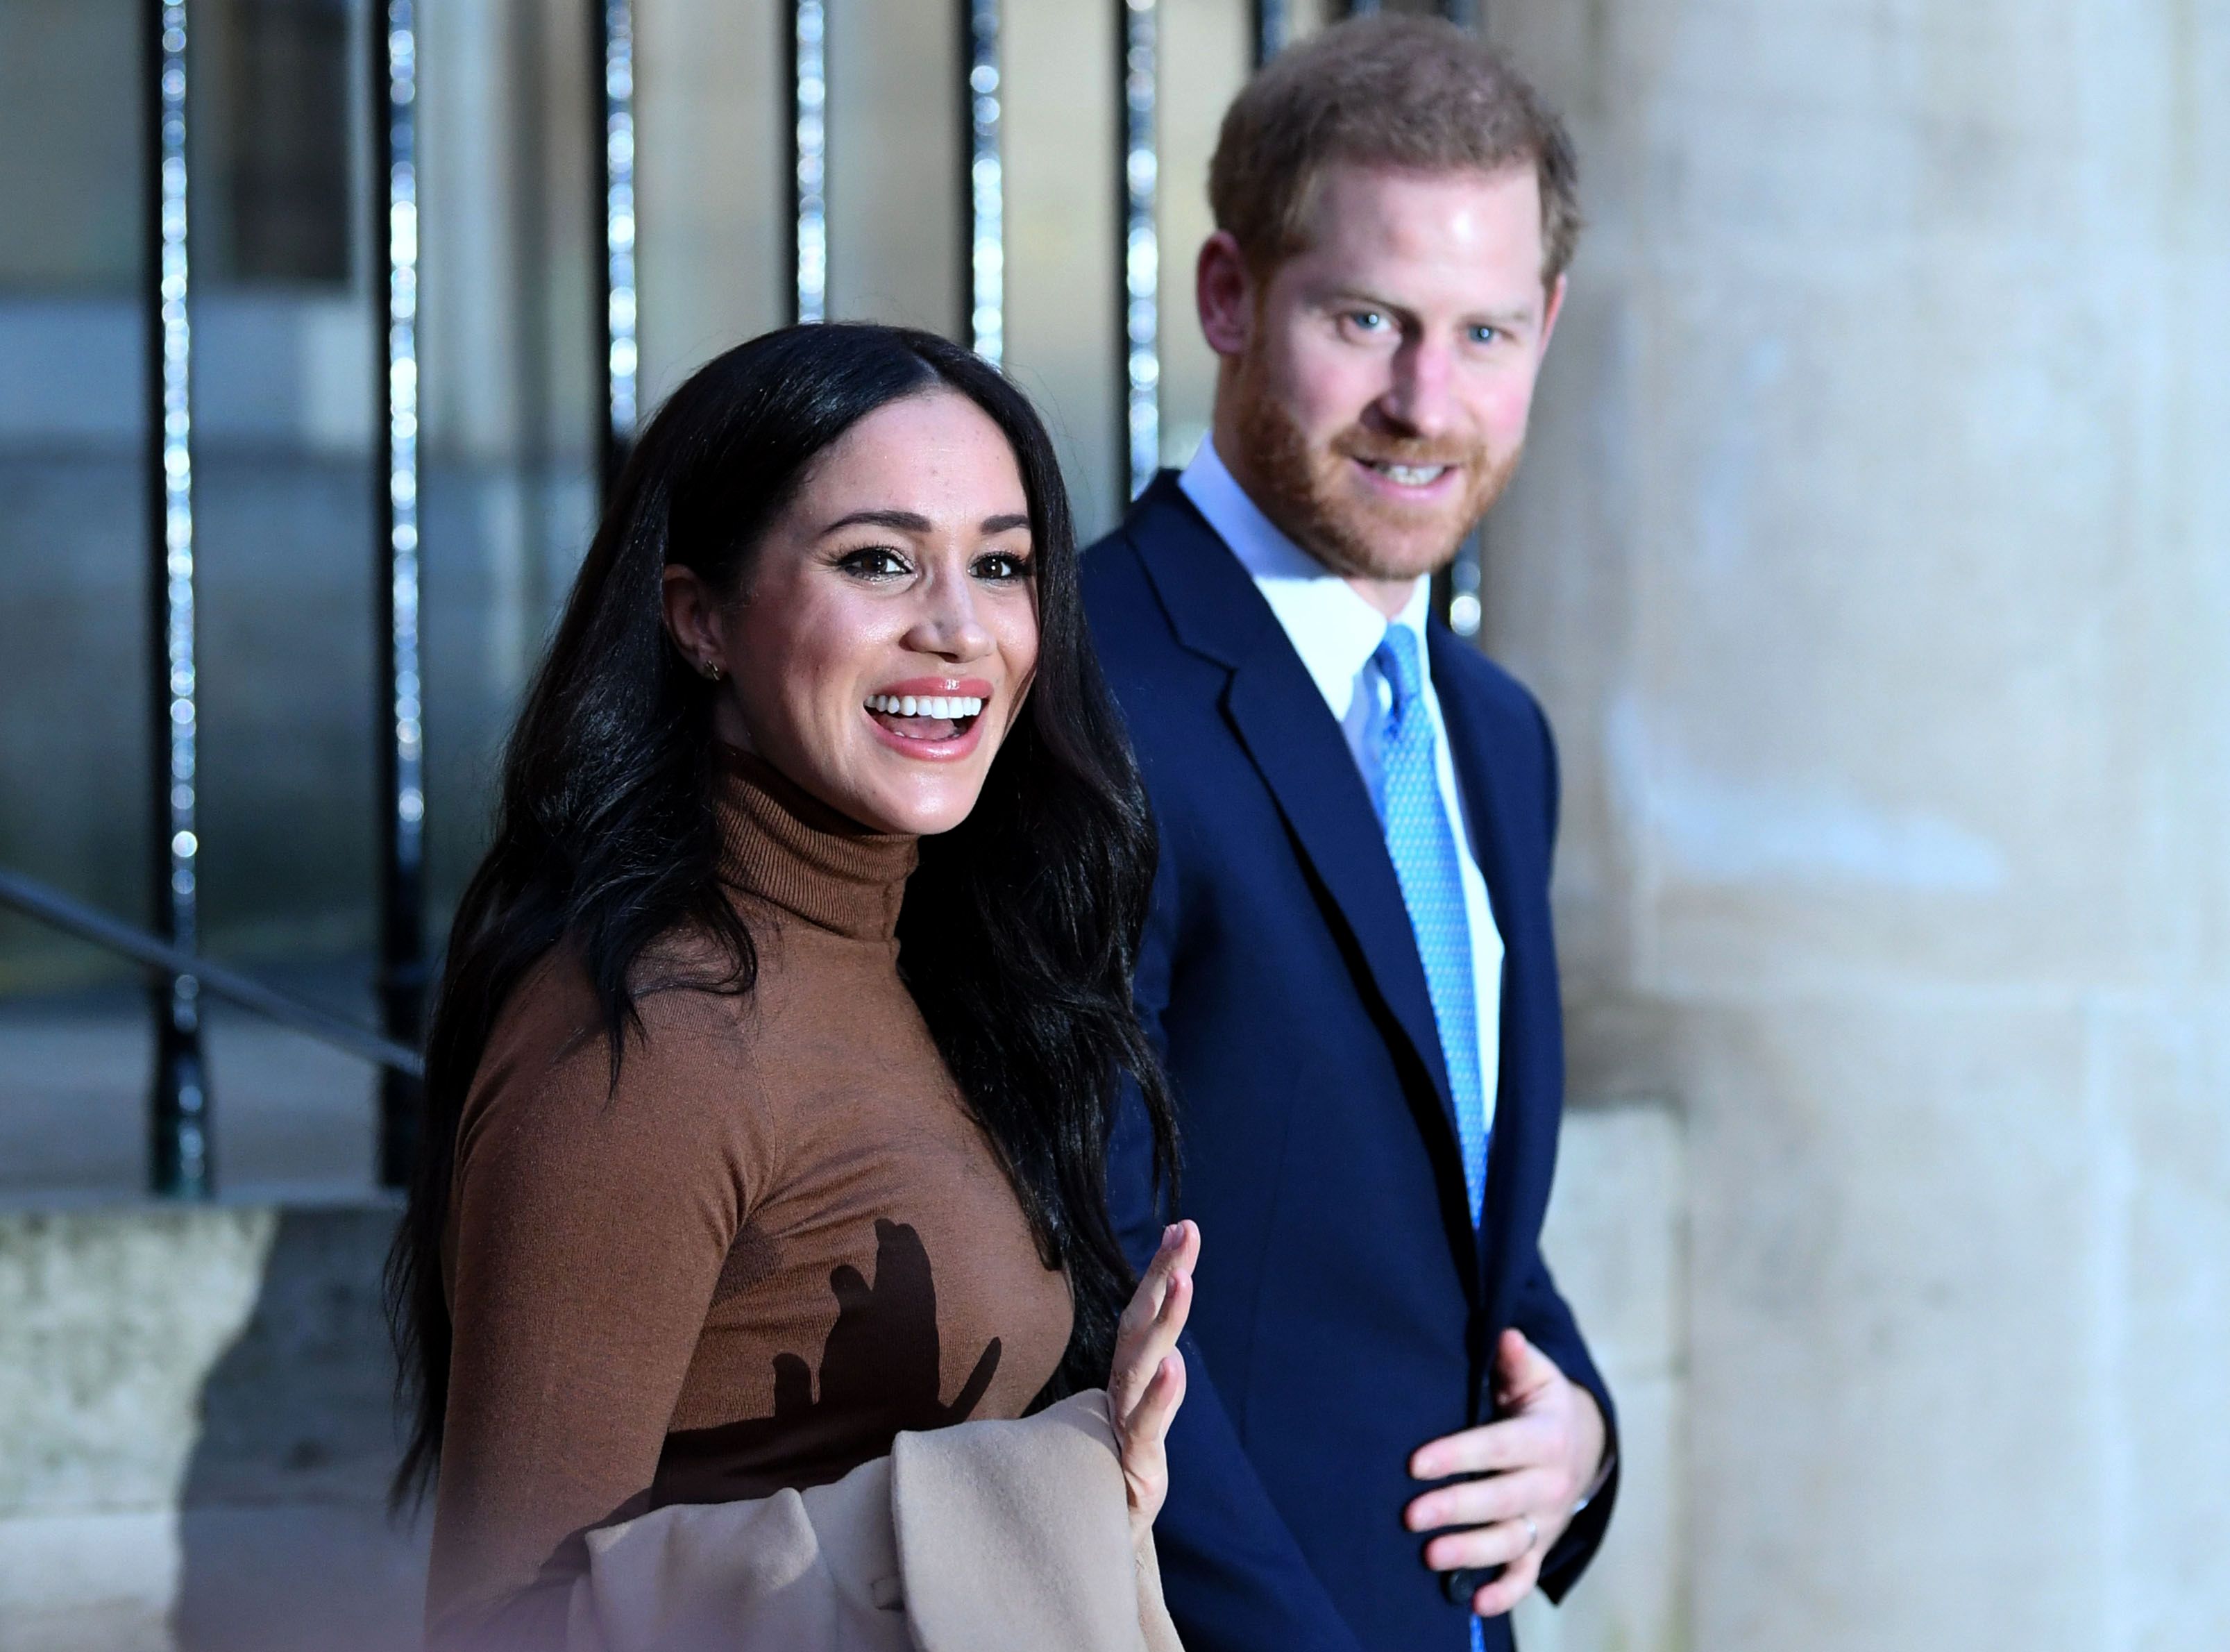  Prince Harry, Duke of Sussex and Meghan, Duchess of Sussex react after their visit to Canada House in thanks for the warm Canadian hospitality and support they received during their recent stay in Canada, on January 7, 2020 | Getty Images